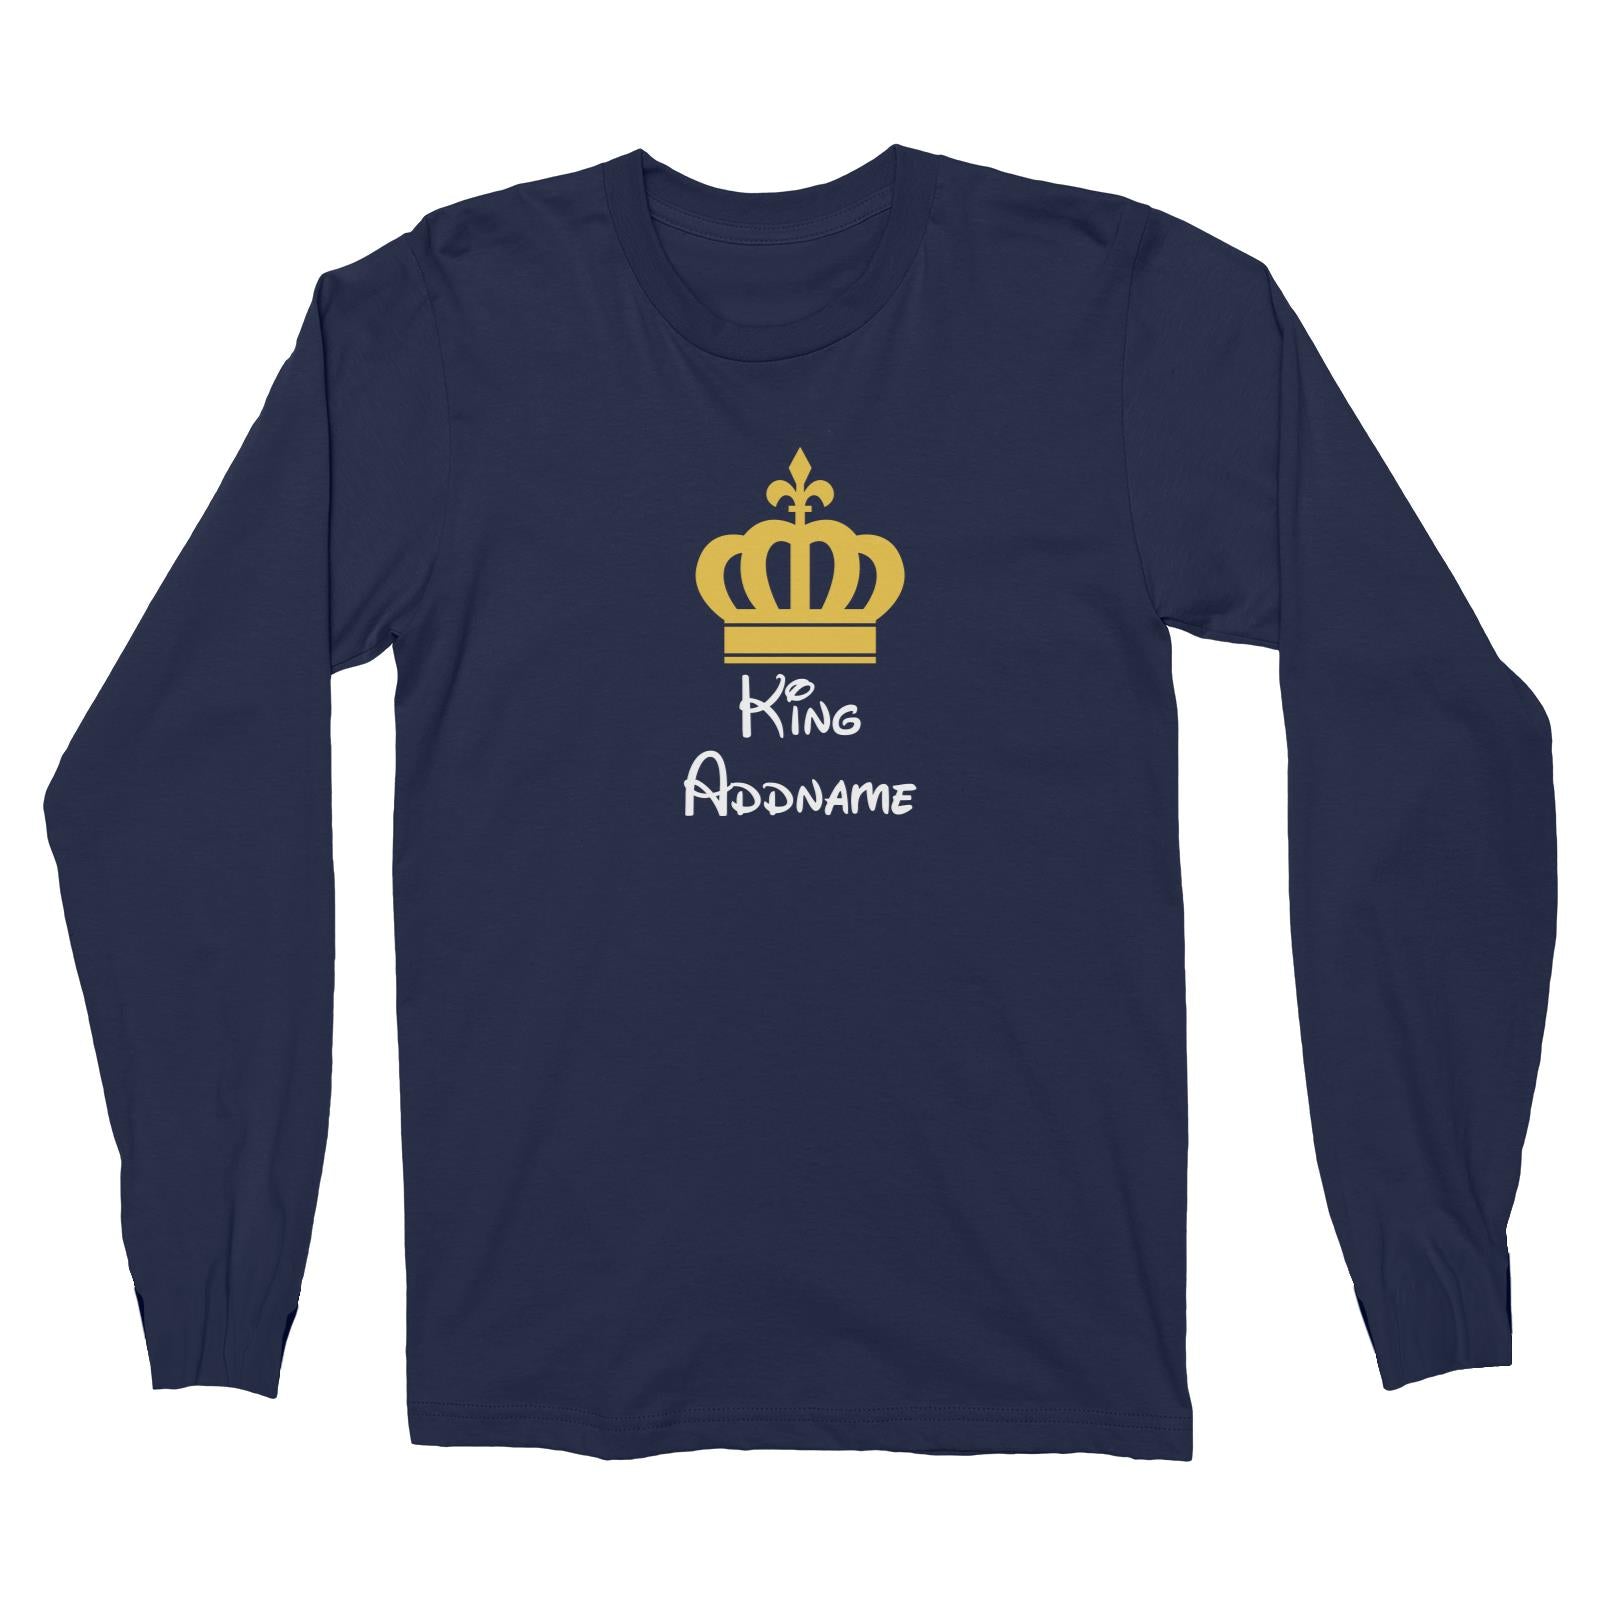 Royal King with Crown Addname Long Sleeve Unisex T-Shirt